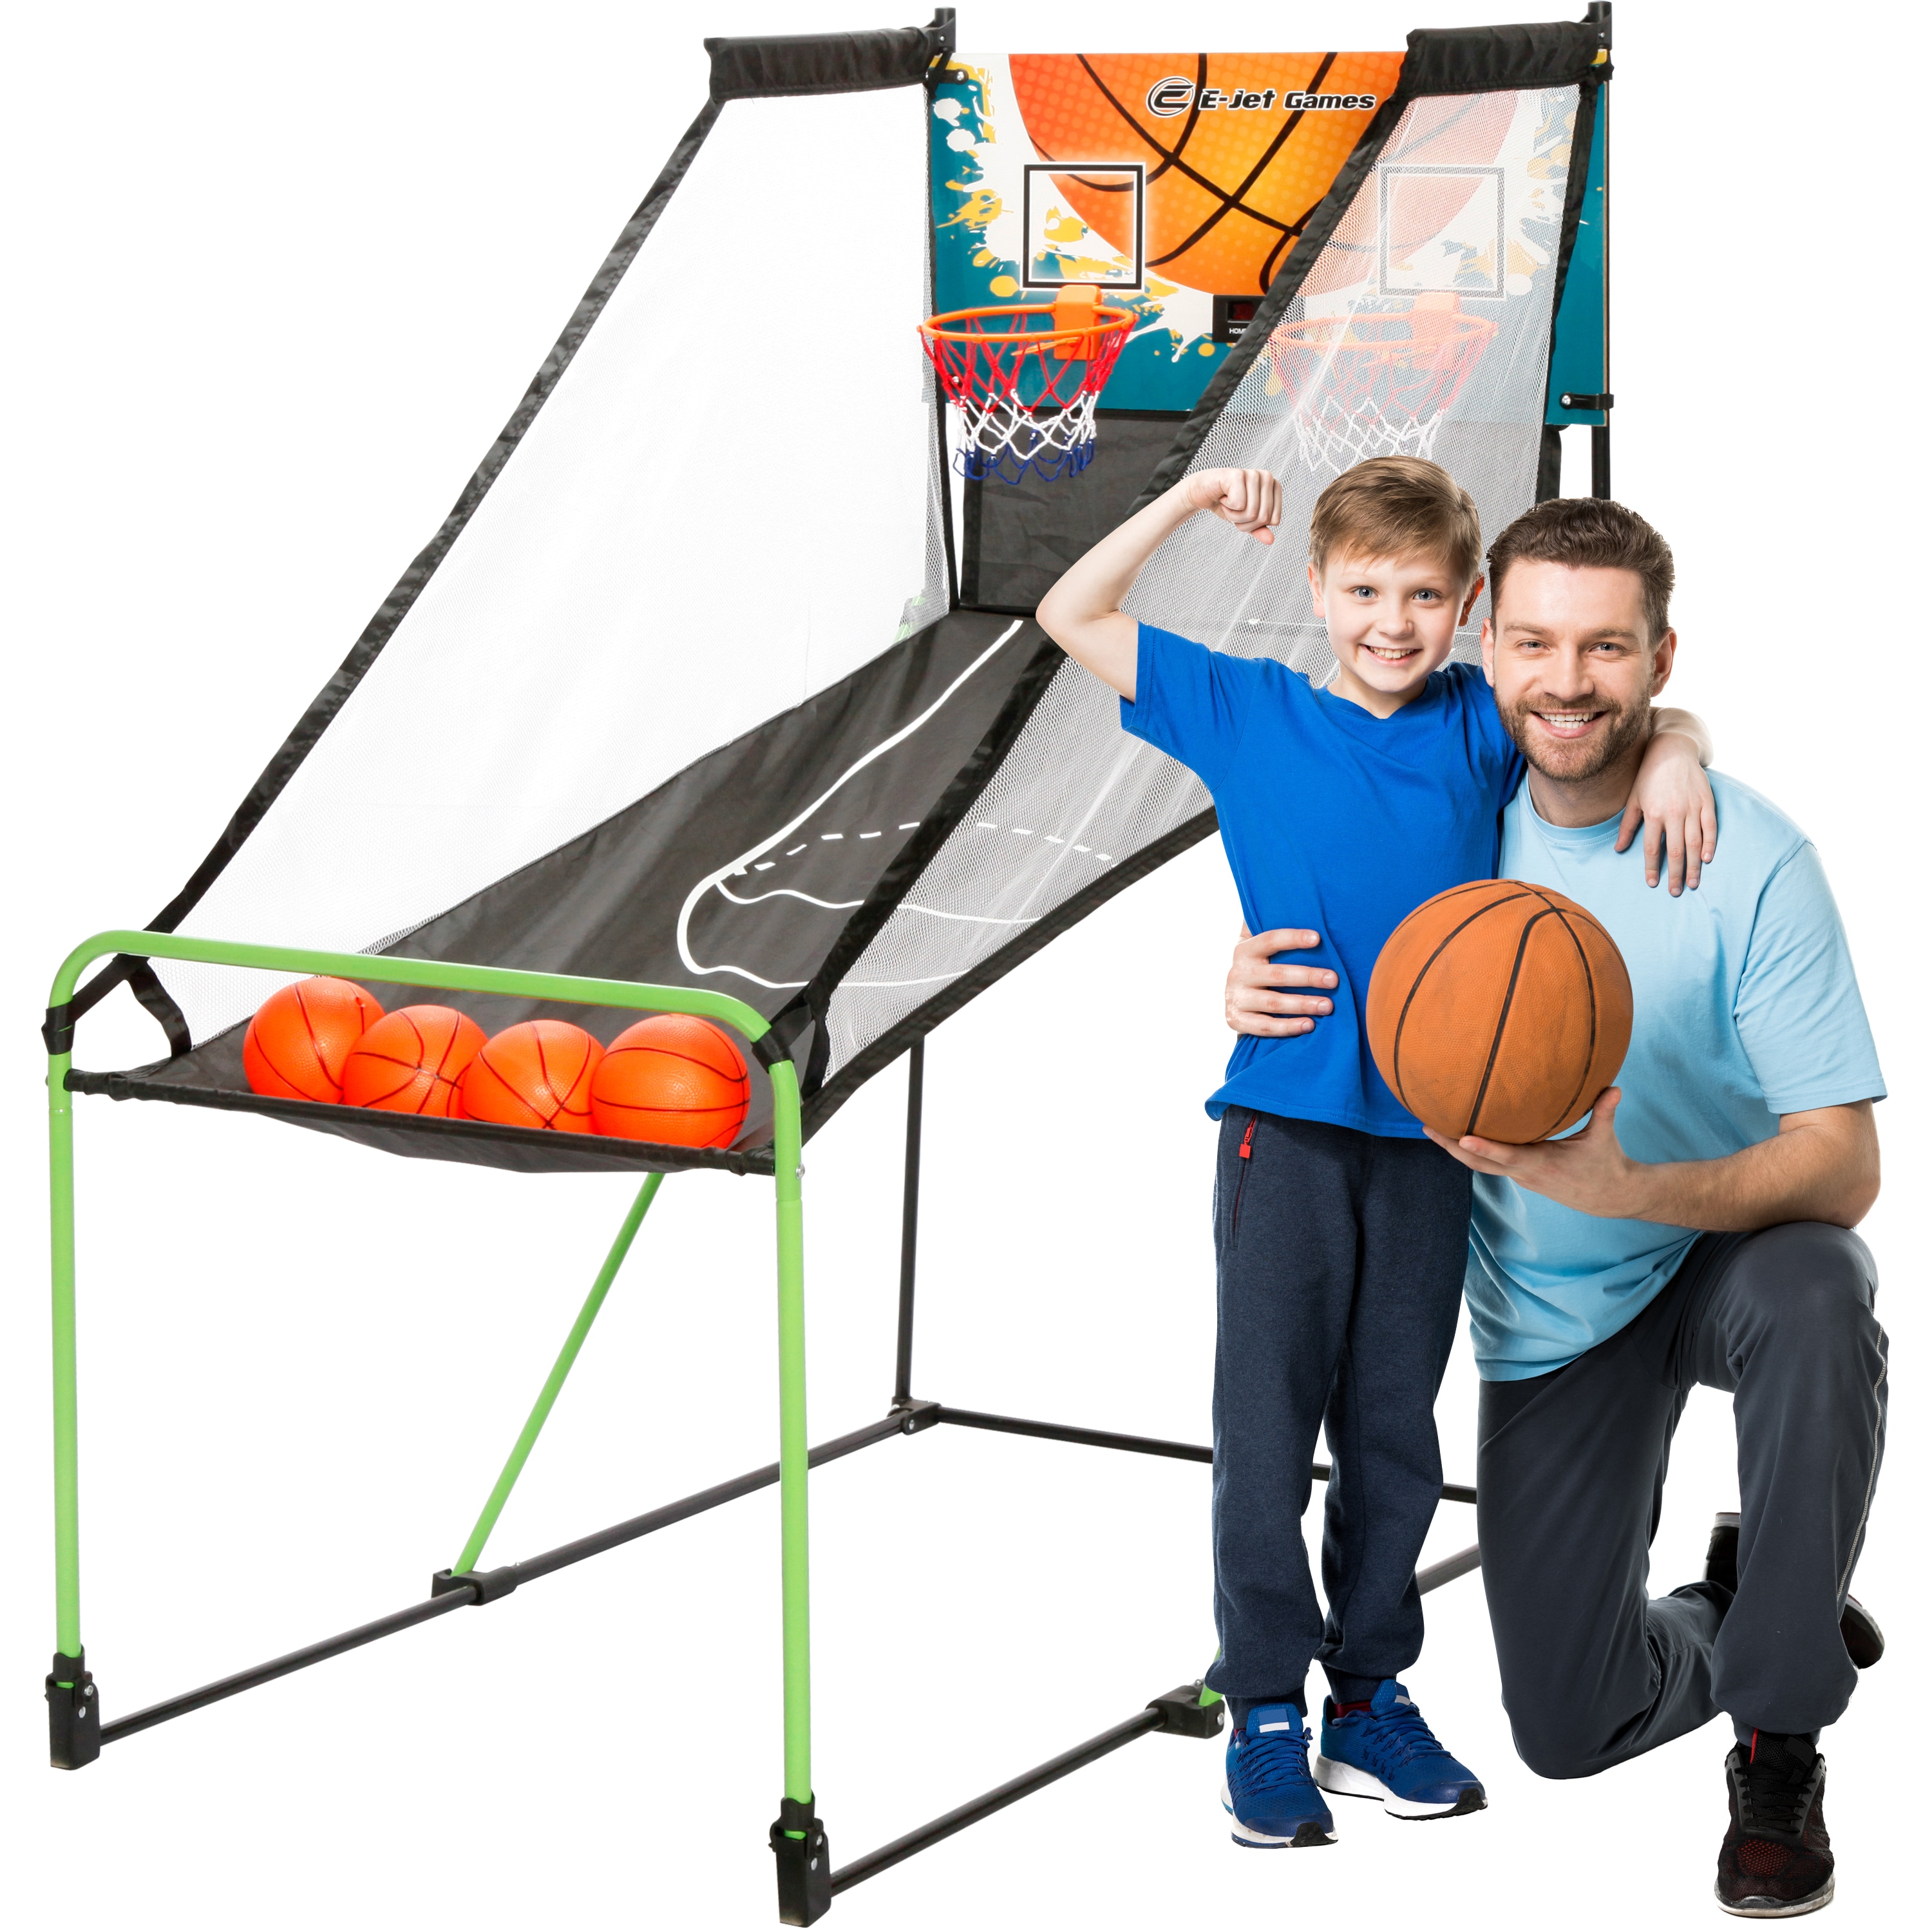 Basketball Arcade Game Gifts for Kids, Easy Set Up Battery-powered Indoor Basketball Game in the Electronic Basketball Games department at Lowes